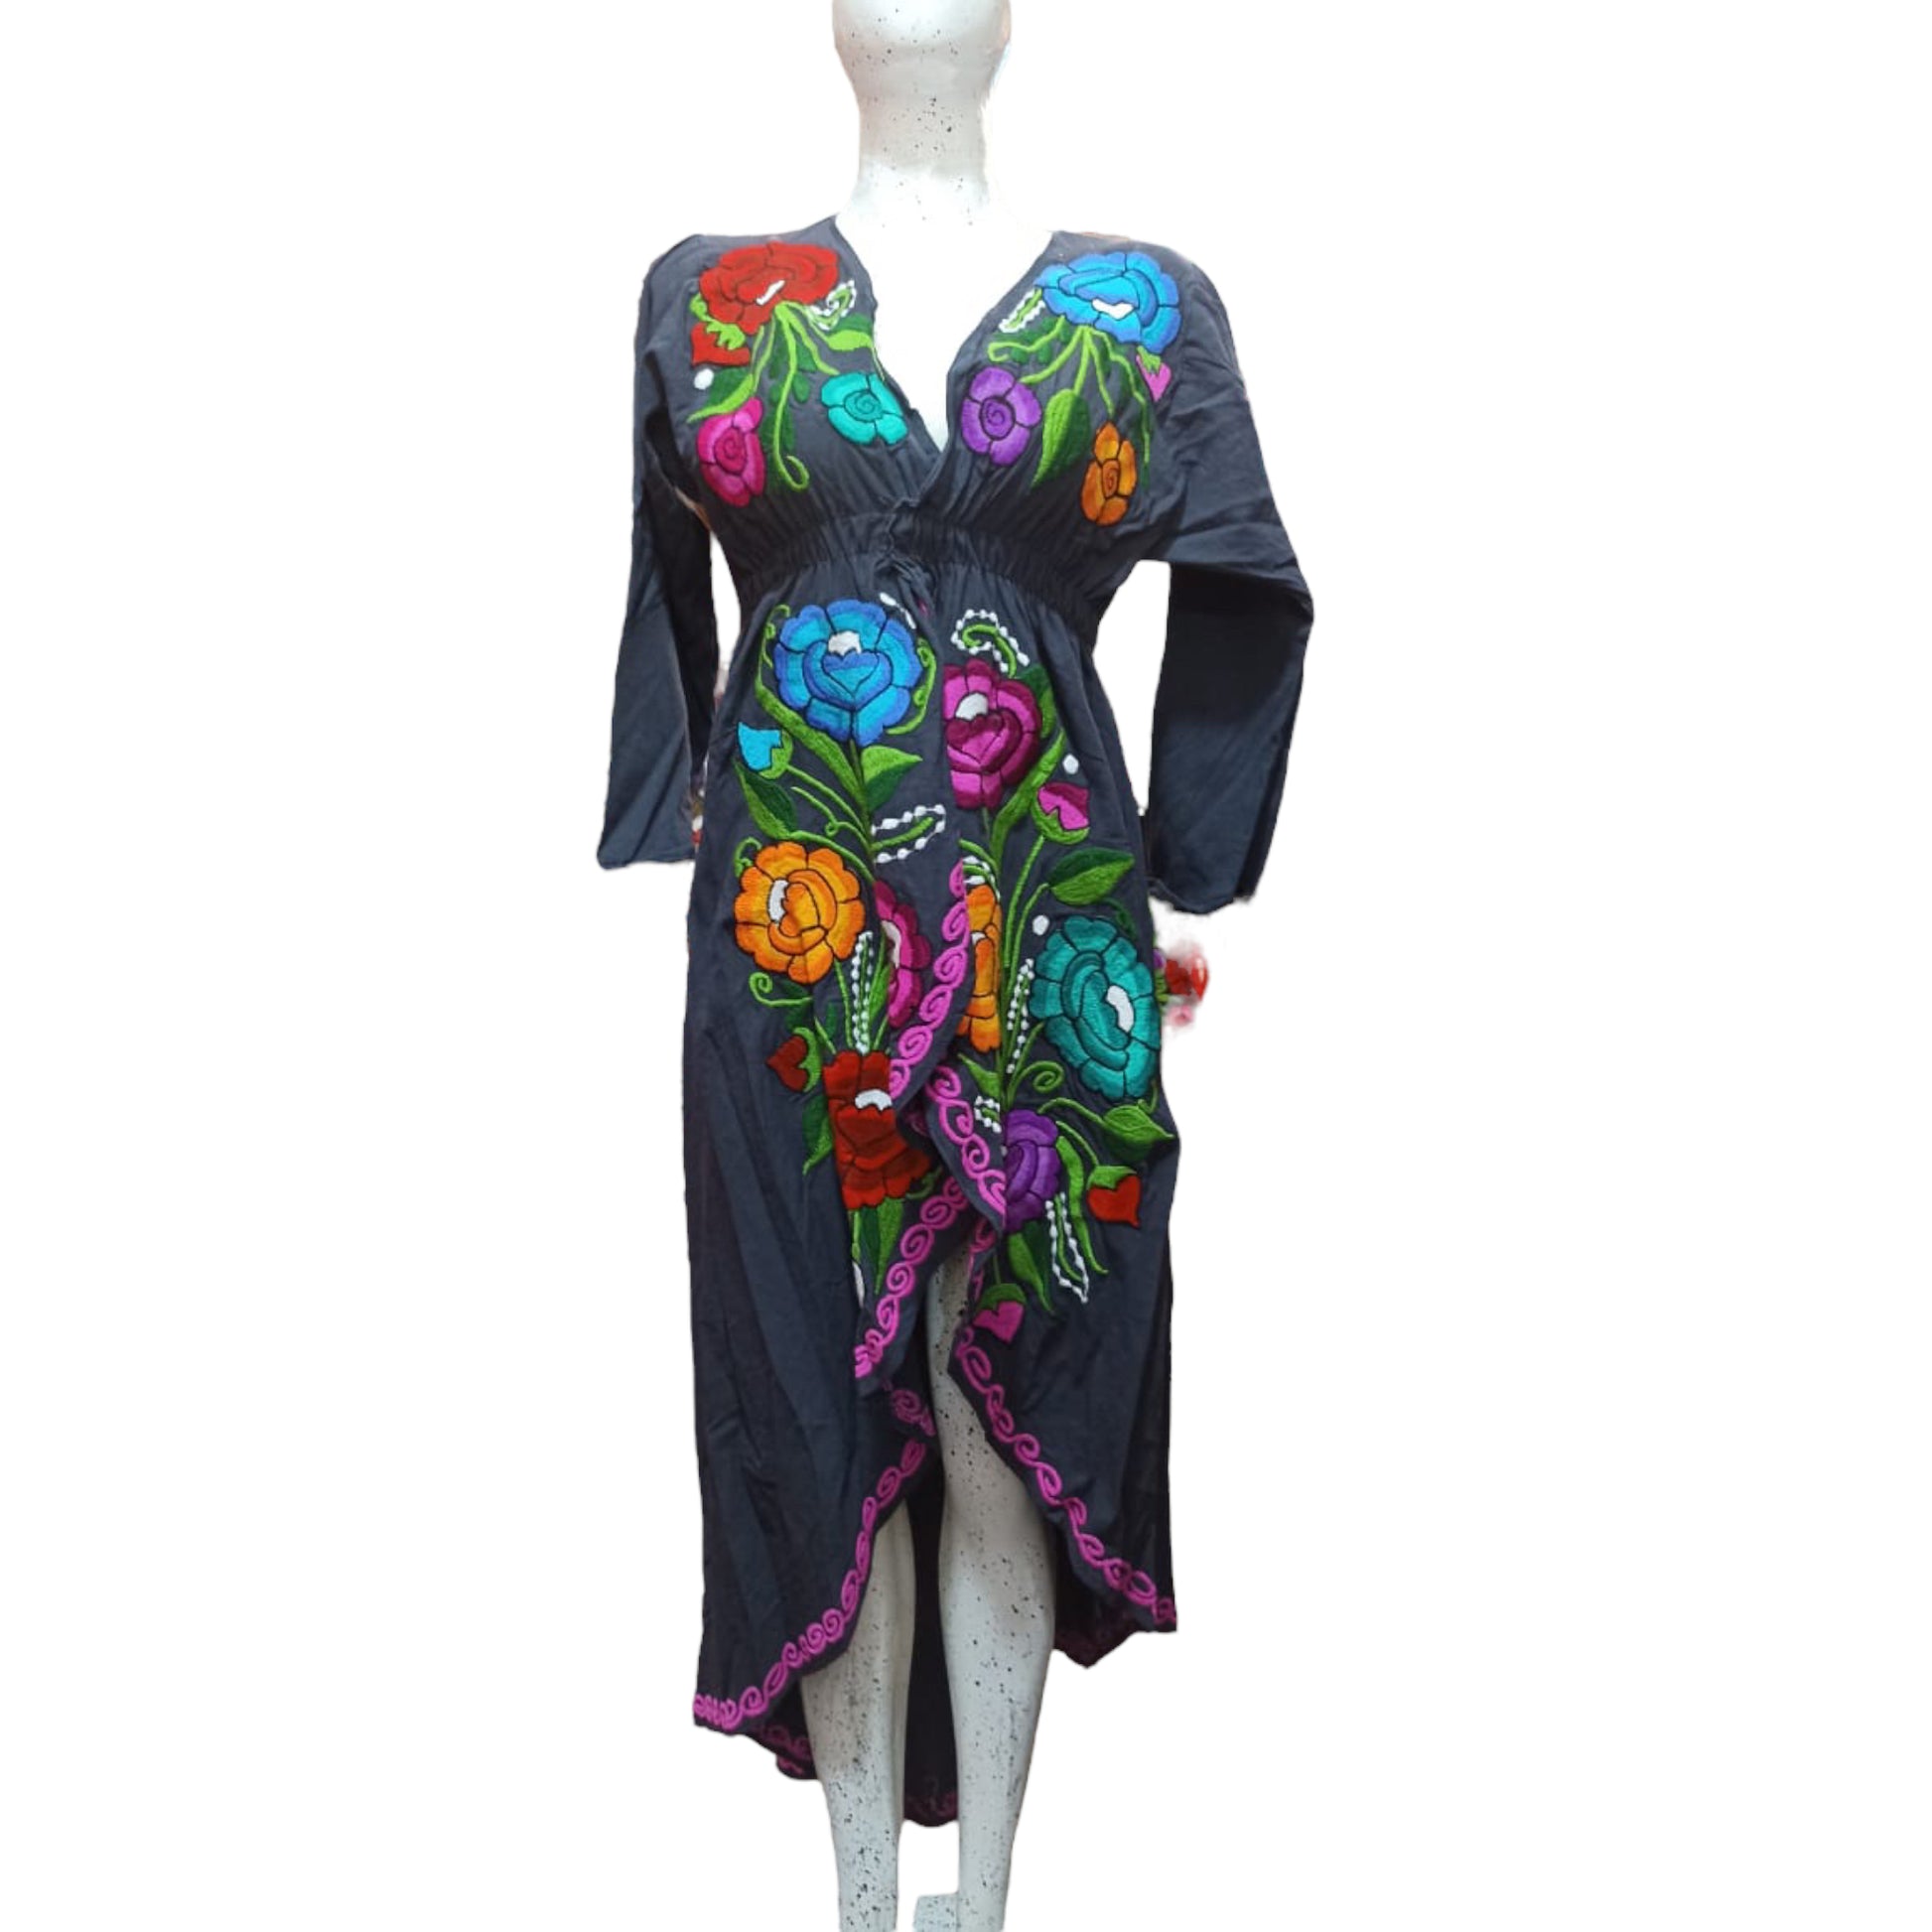 Long-tailed black dress with embroidered flowers of different sizes in blue, red, green and purple.